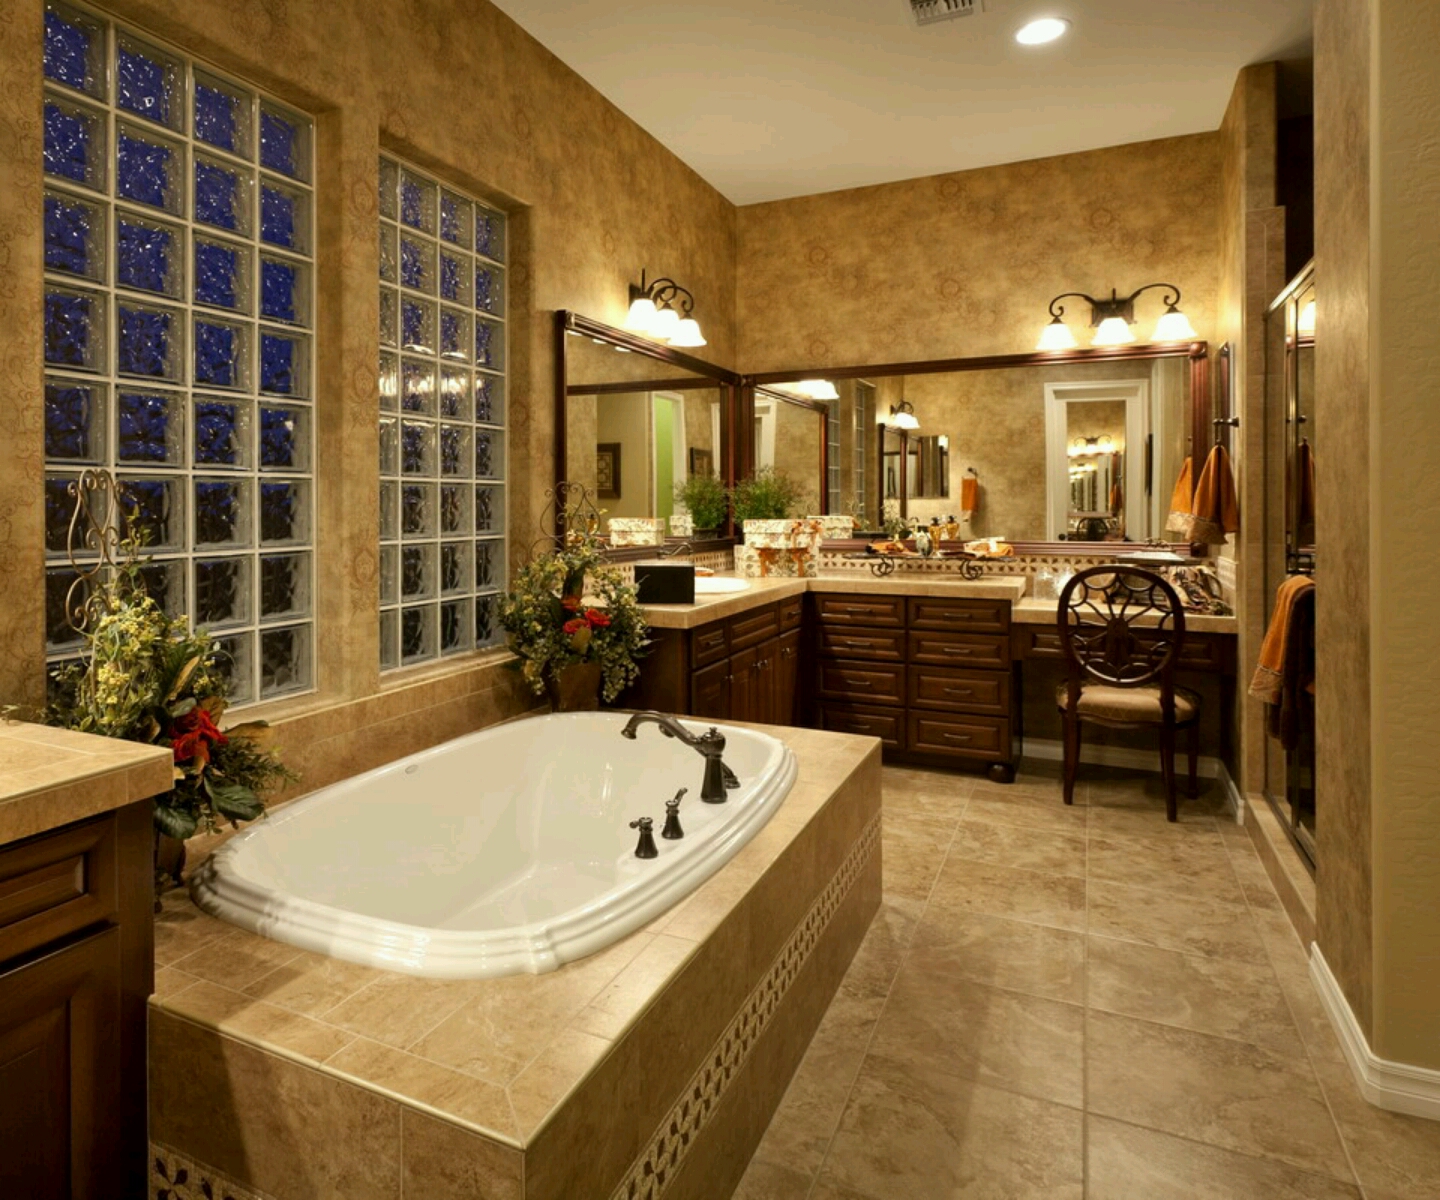 Traditional Bathroom Bathroom Dazzling Traditional Bathroom Applying Master Bathroom Ideas Completed With Vase Flowers Decorations On Side White Bathtub And Furnished With Sectional Vanity And Mirrors Bathroom Master Bathroom Ideas: Choosing The Ceramic